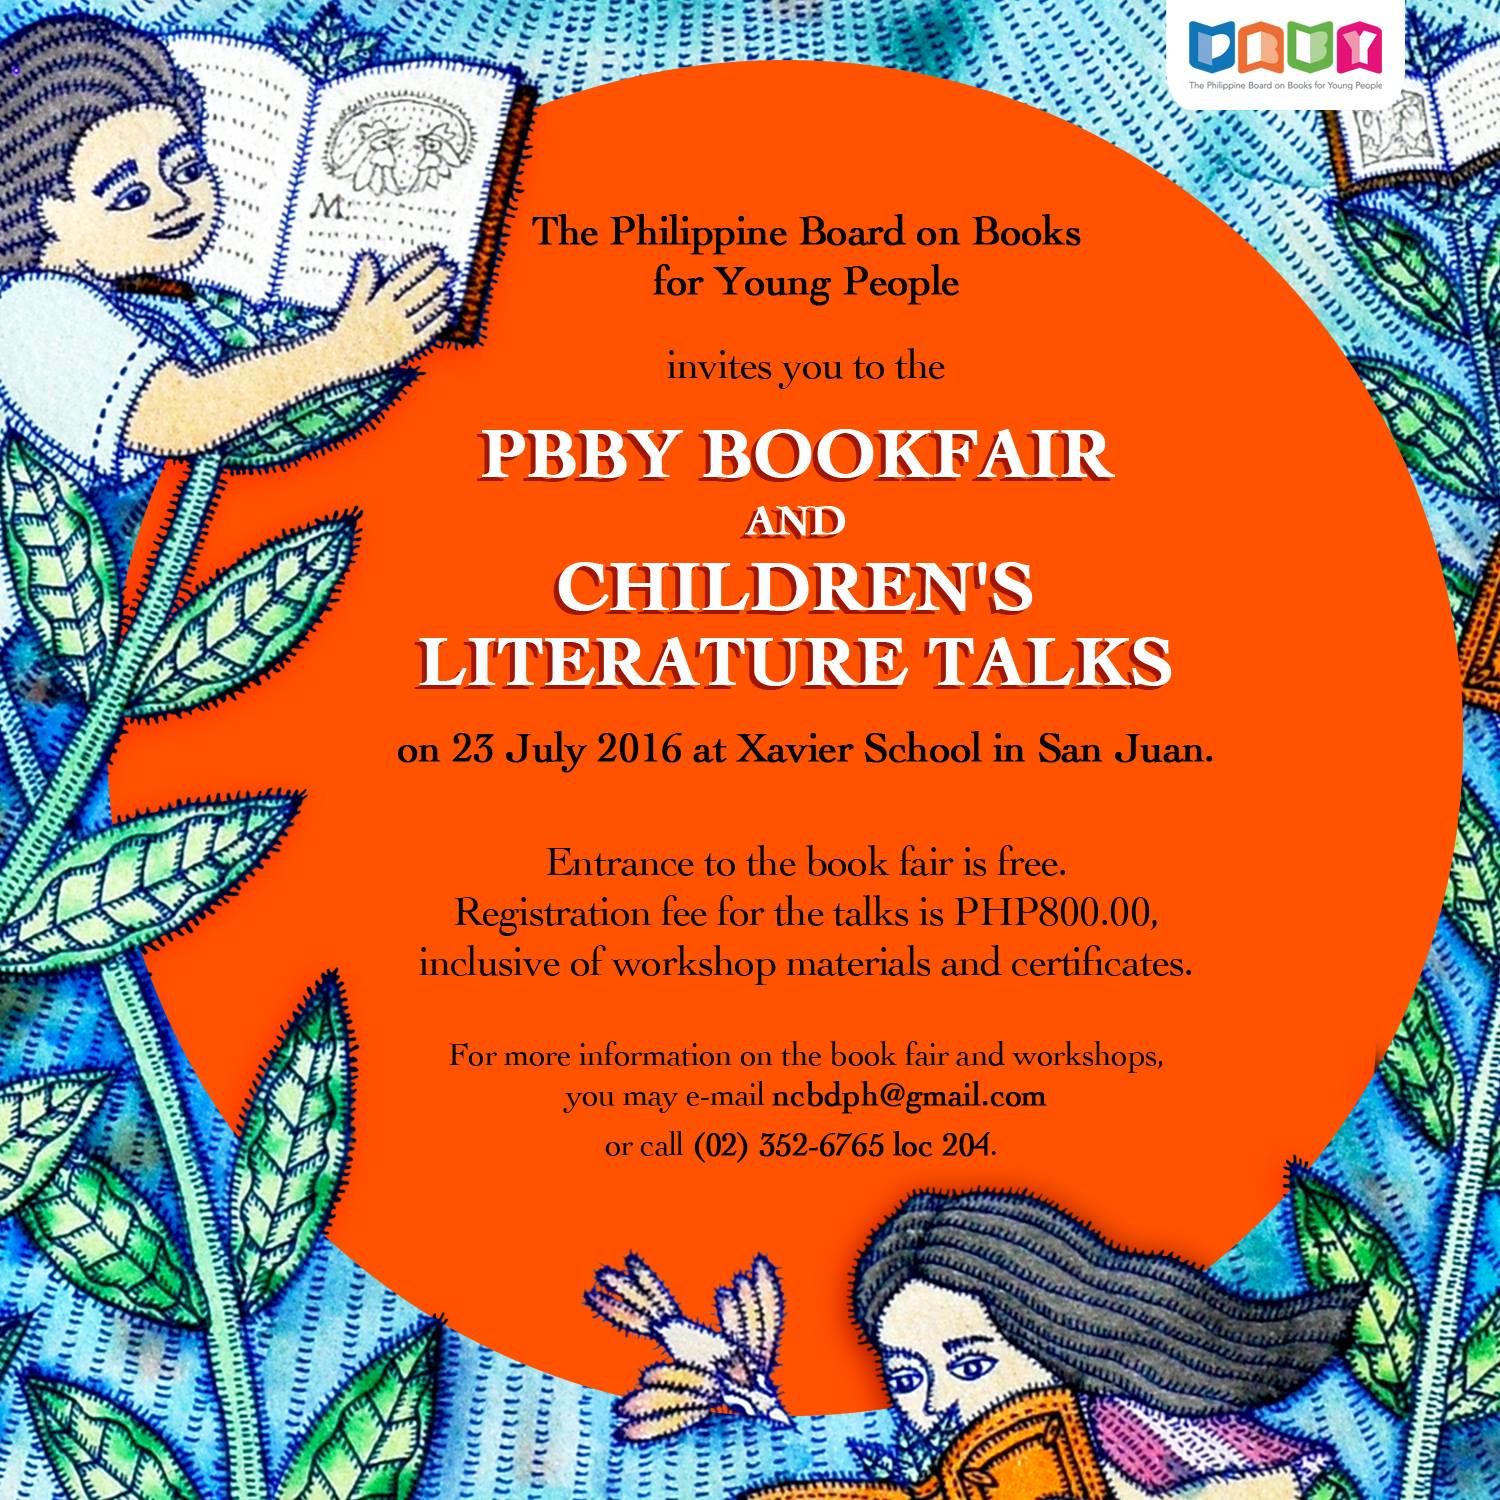 The 2016 NCBD Book Fair & Children's Literature Talks Hosted by The Philippine Board on Books for Young People     clock     	     Today at 8 AM     Happening Now · 86° Partly Cloudy     pin     	     Show Map     Xavier School     64 Xavier Street, Greenhills, San Juan, 1502 Manila, Philippines     About     Discussion     Write Post     Add Photo / Video     Create Poll Details The 2016 National Children's Book Fair will be a a showcase of Filipino children's books and young adult books by publishers based in the Philippines. The book fair highlights the annual PBBY Children's Literature Talks for teachers, parents, care givers, librarians, writers, illustrators, storytellers, literacy advocates, researchers in the fields of education and children's literature, content creators, creatives and allied professionals working with and for children's education and well being.